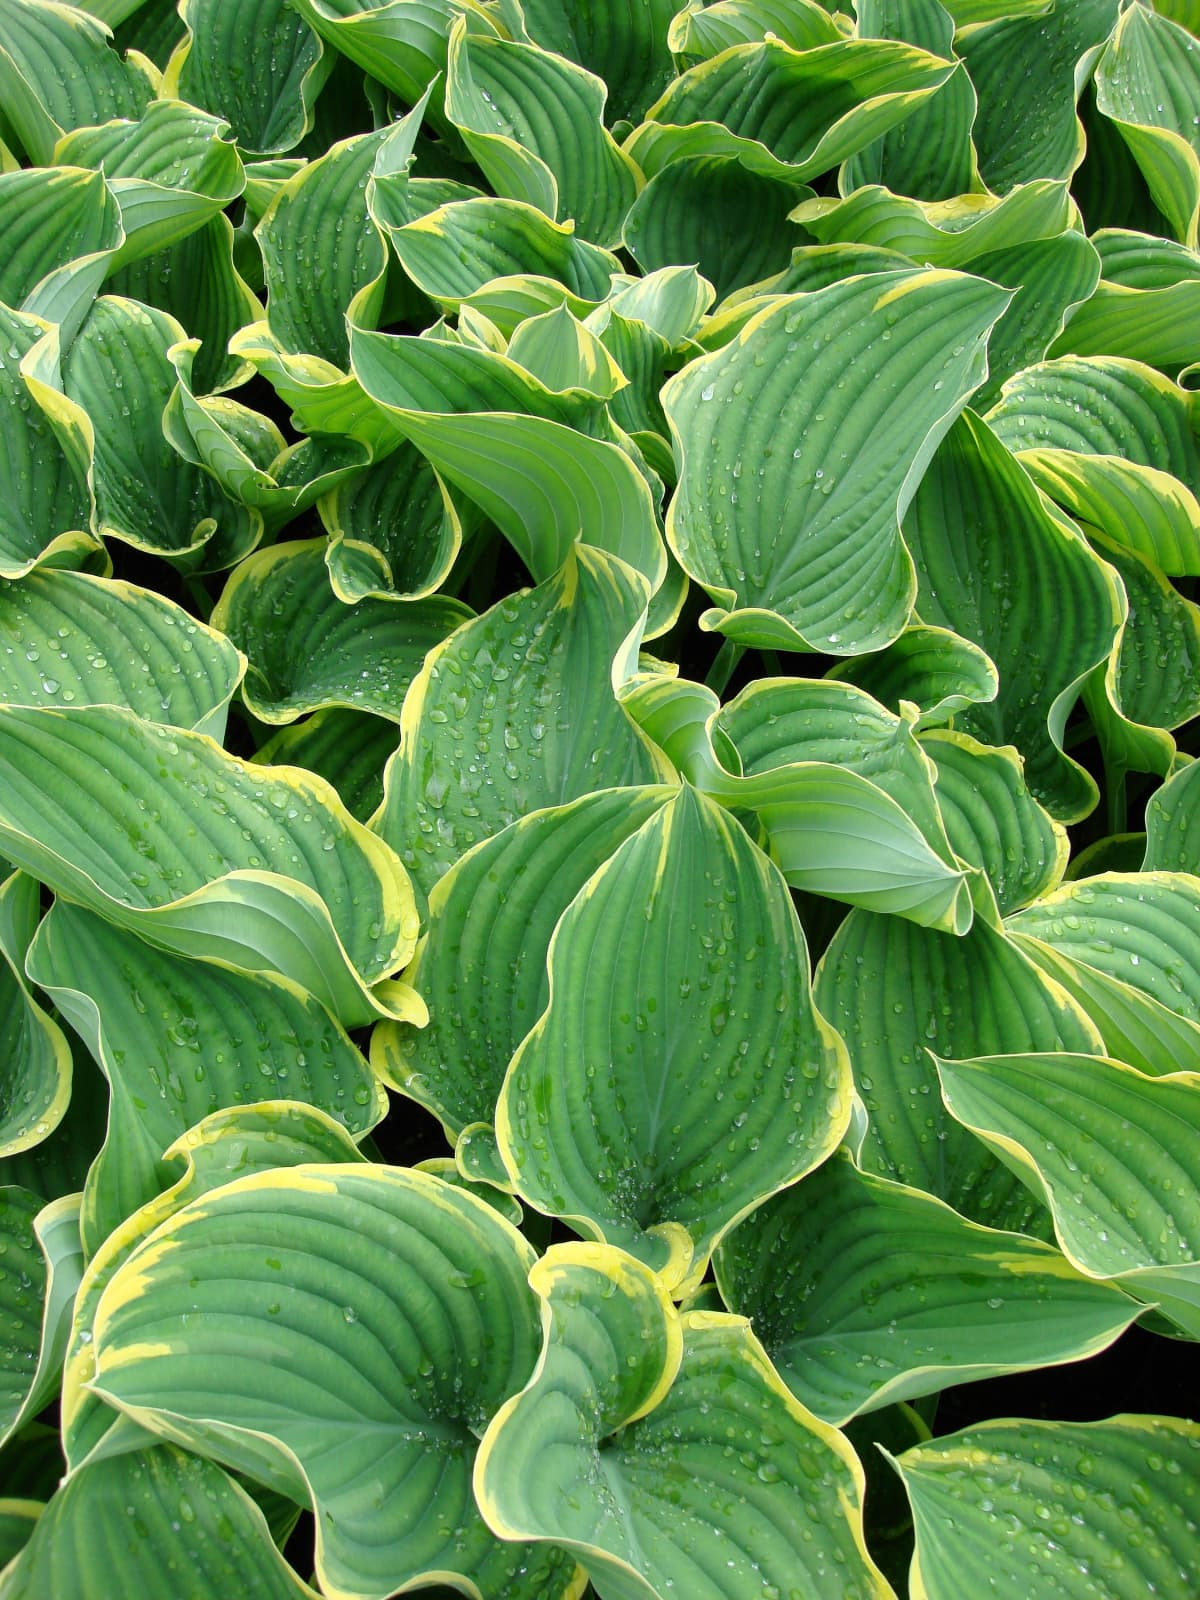 Hosta leaves with dew